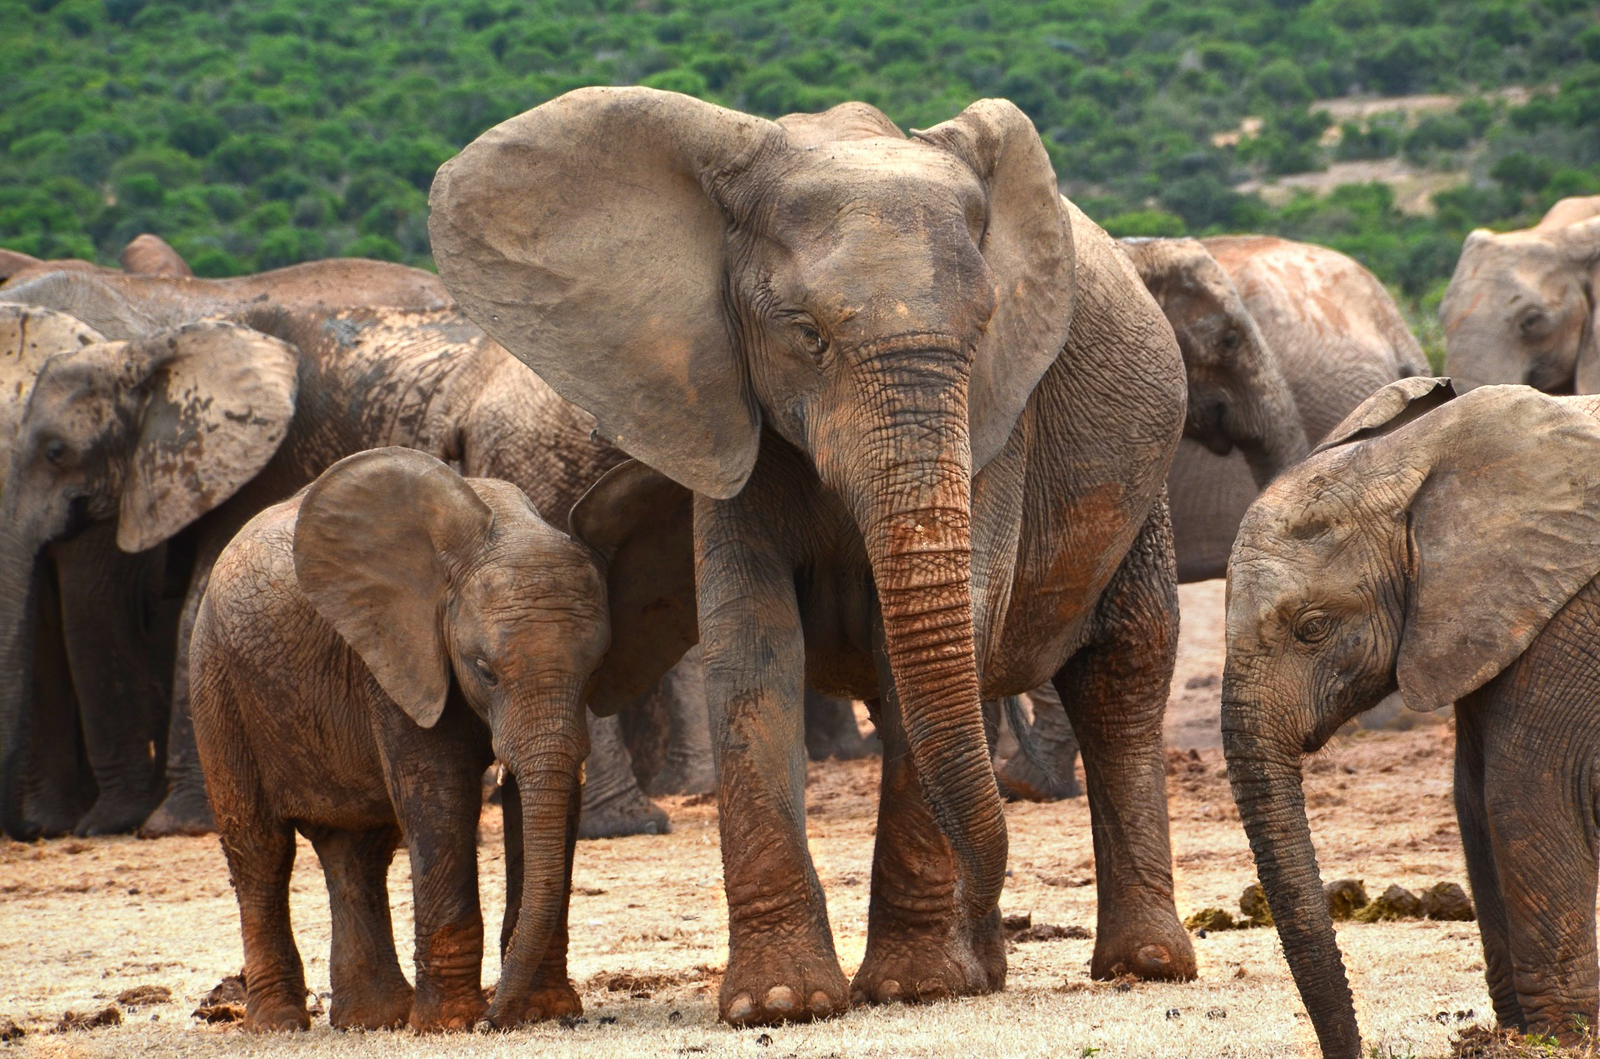 Who is the boss in an elephant family?